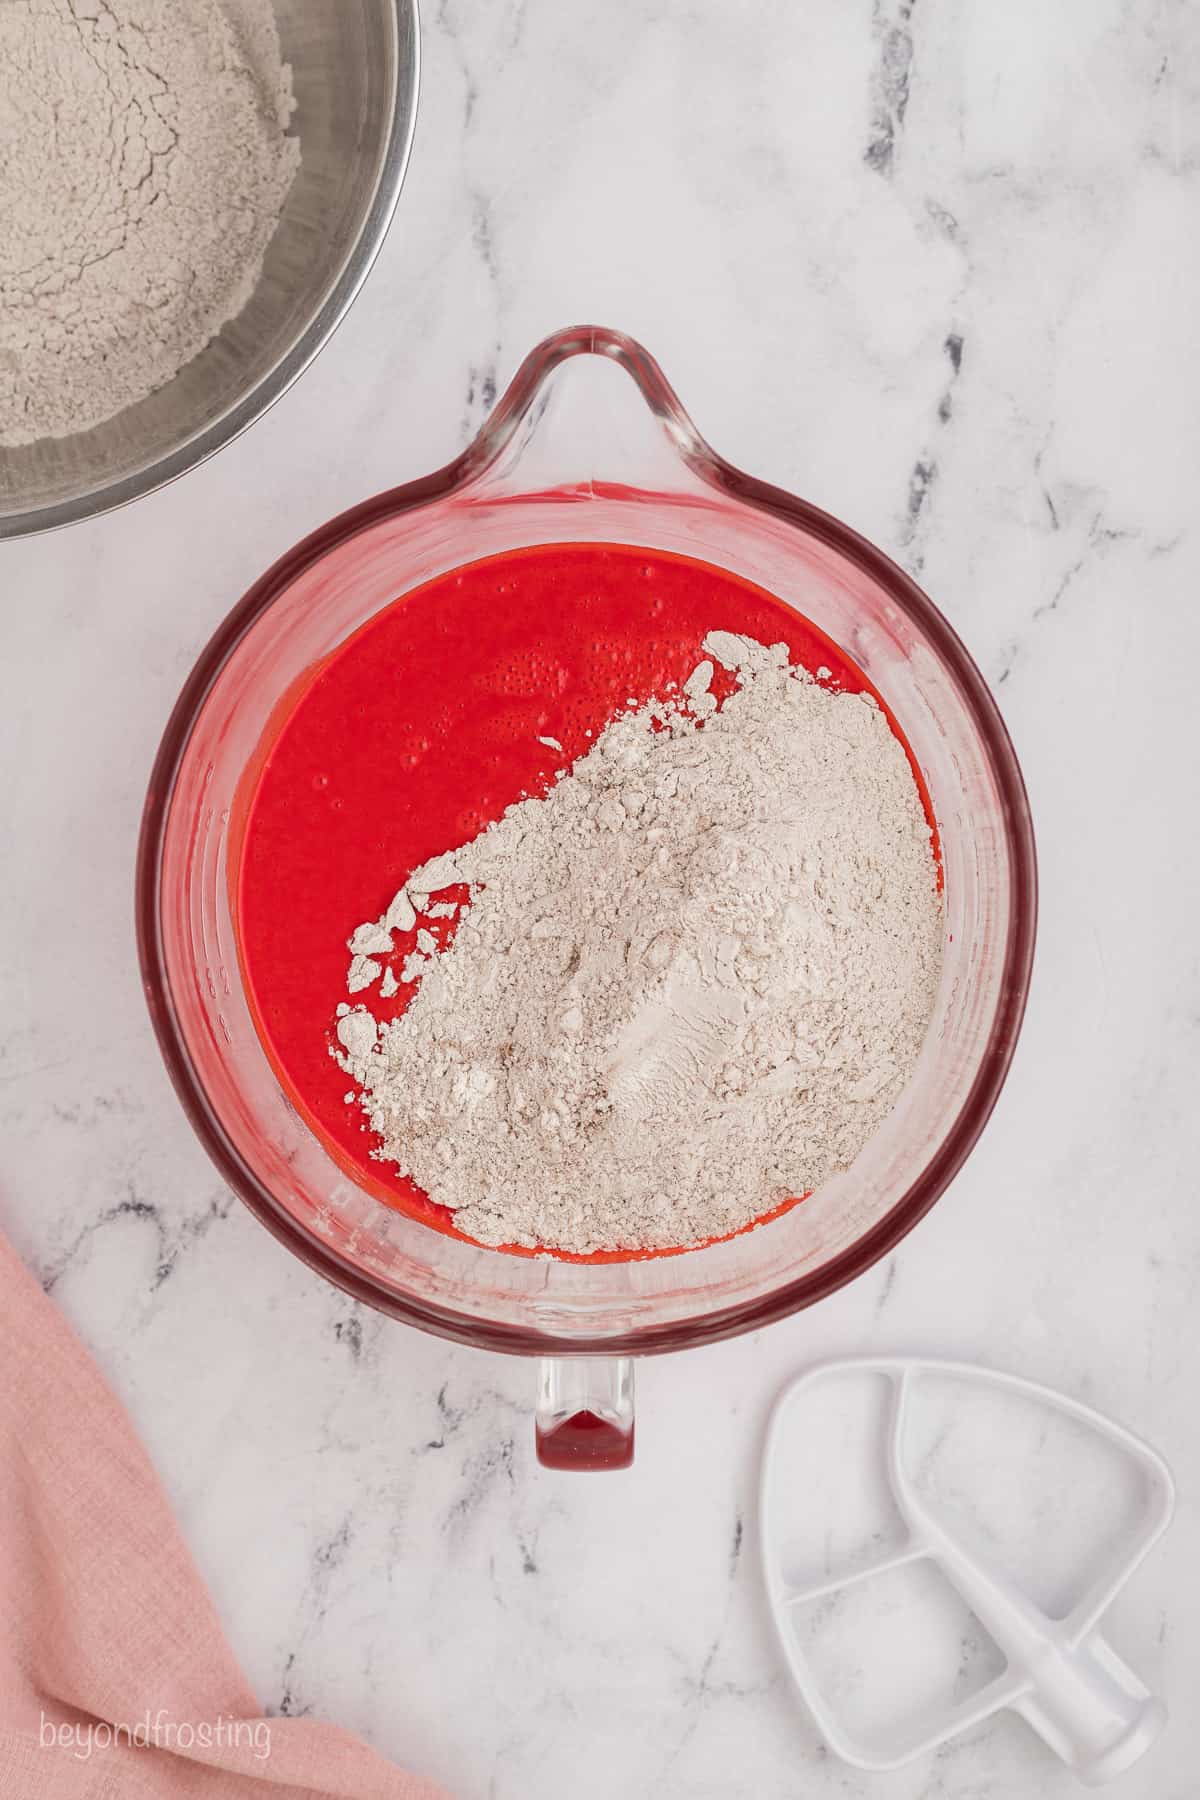 Flour added to red velvet cake batter in a glass mixing bowl.